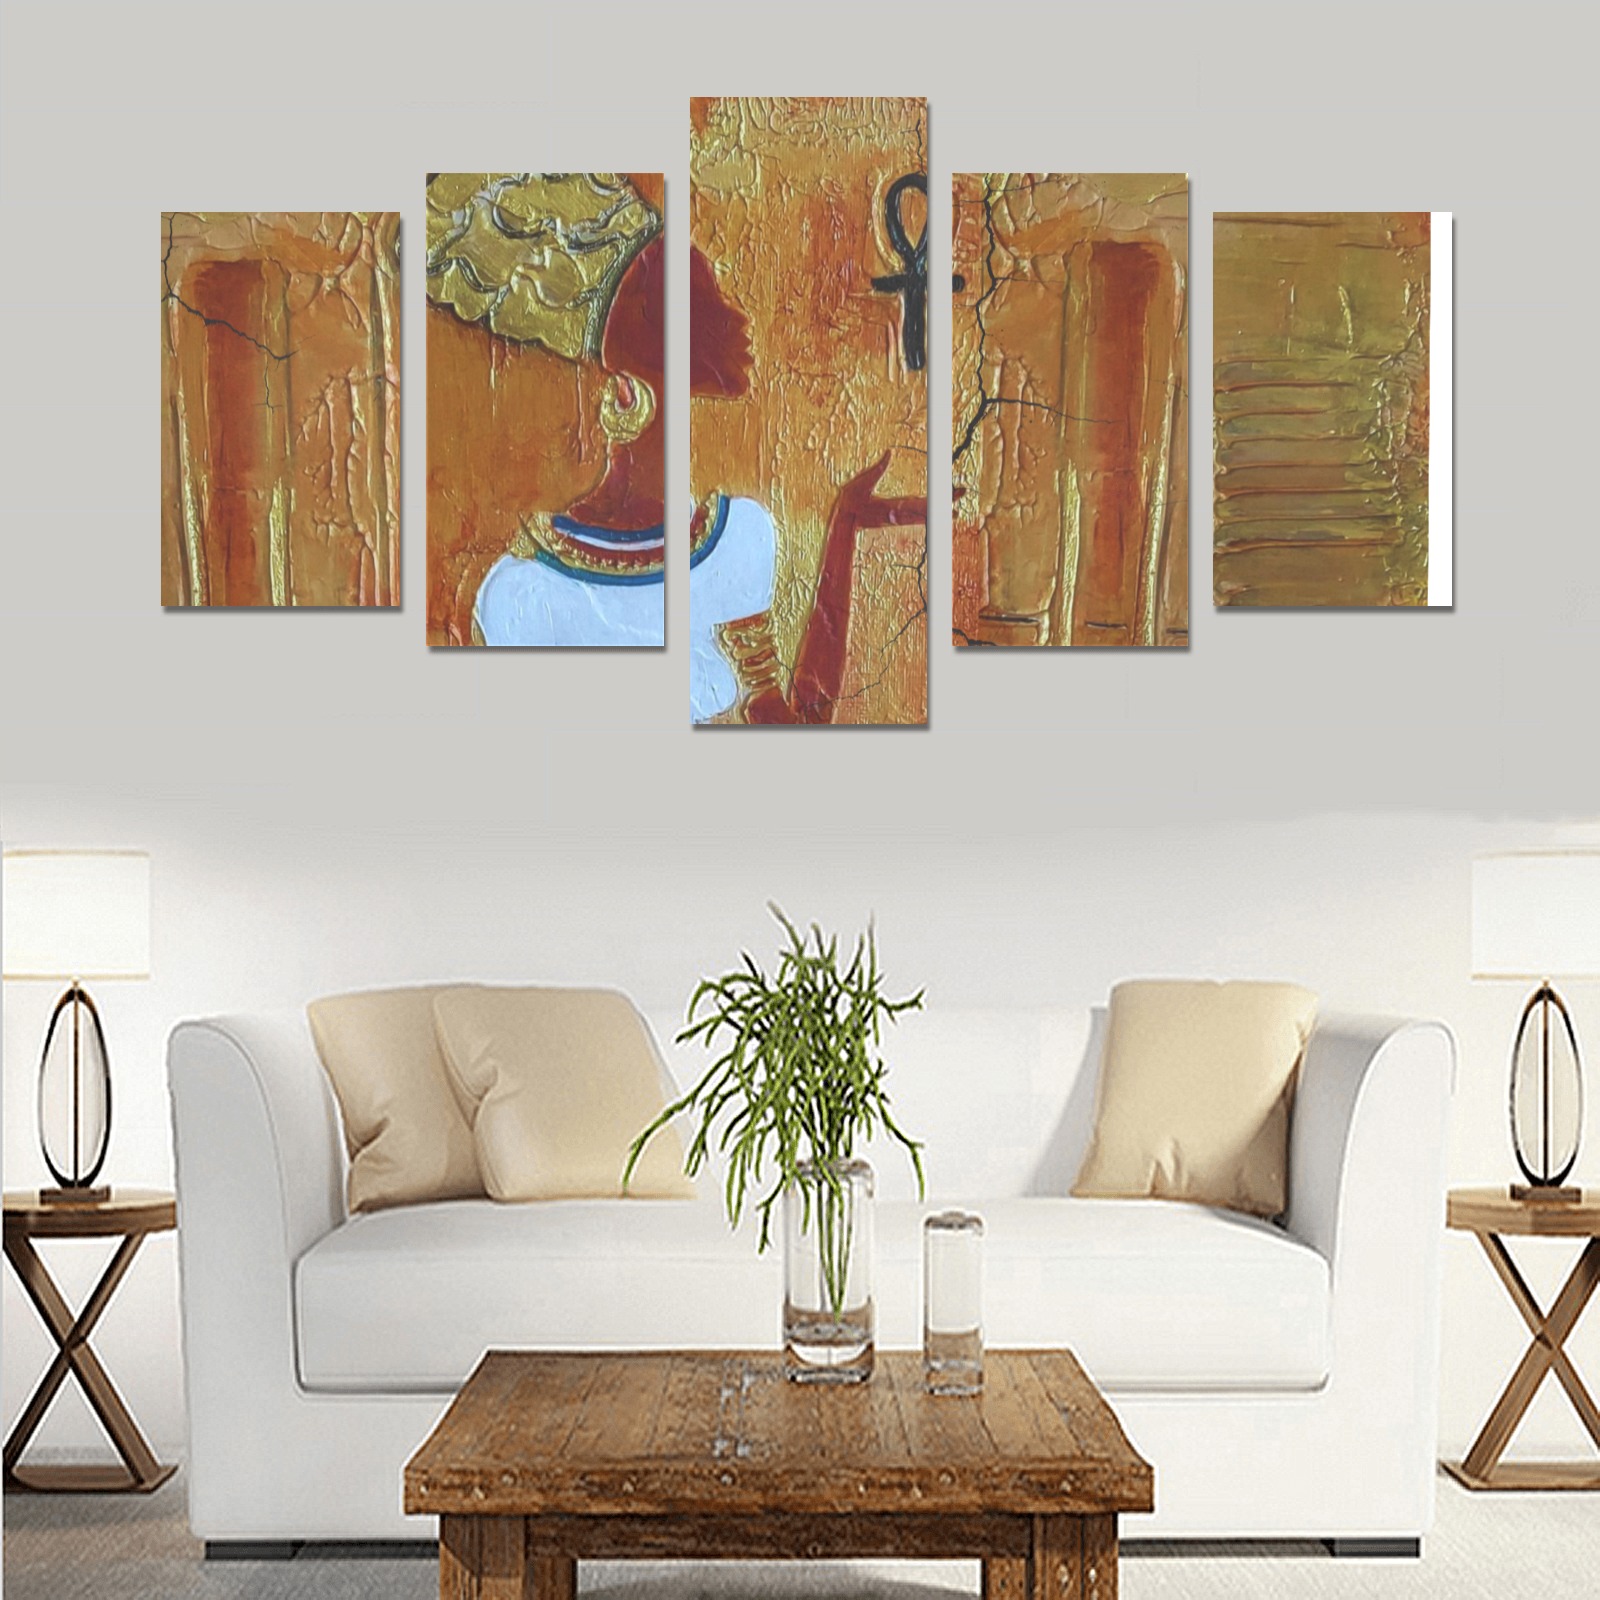 Queen of life Canvas Print Sets C (No Frame)